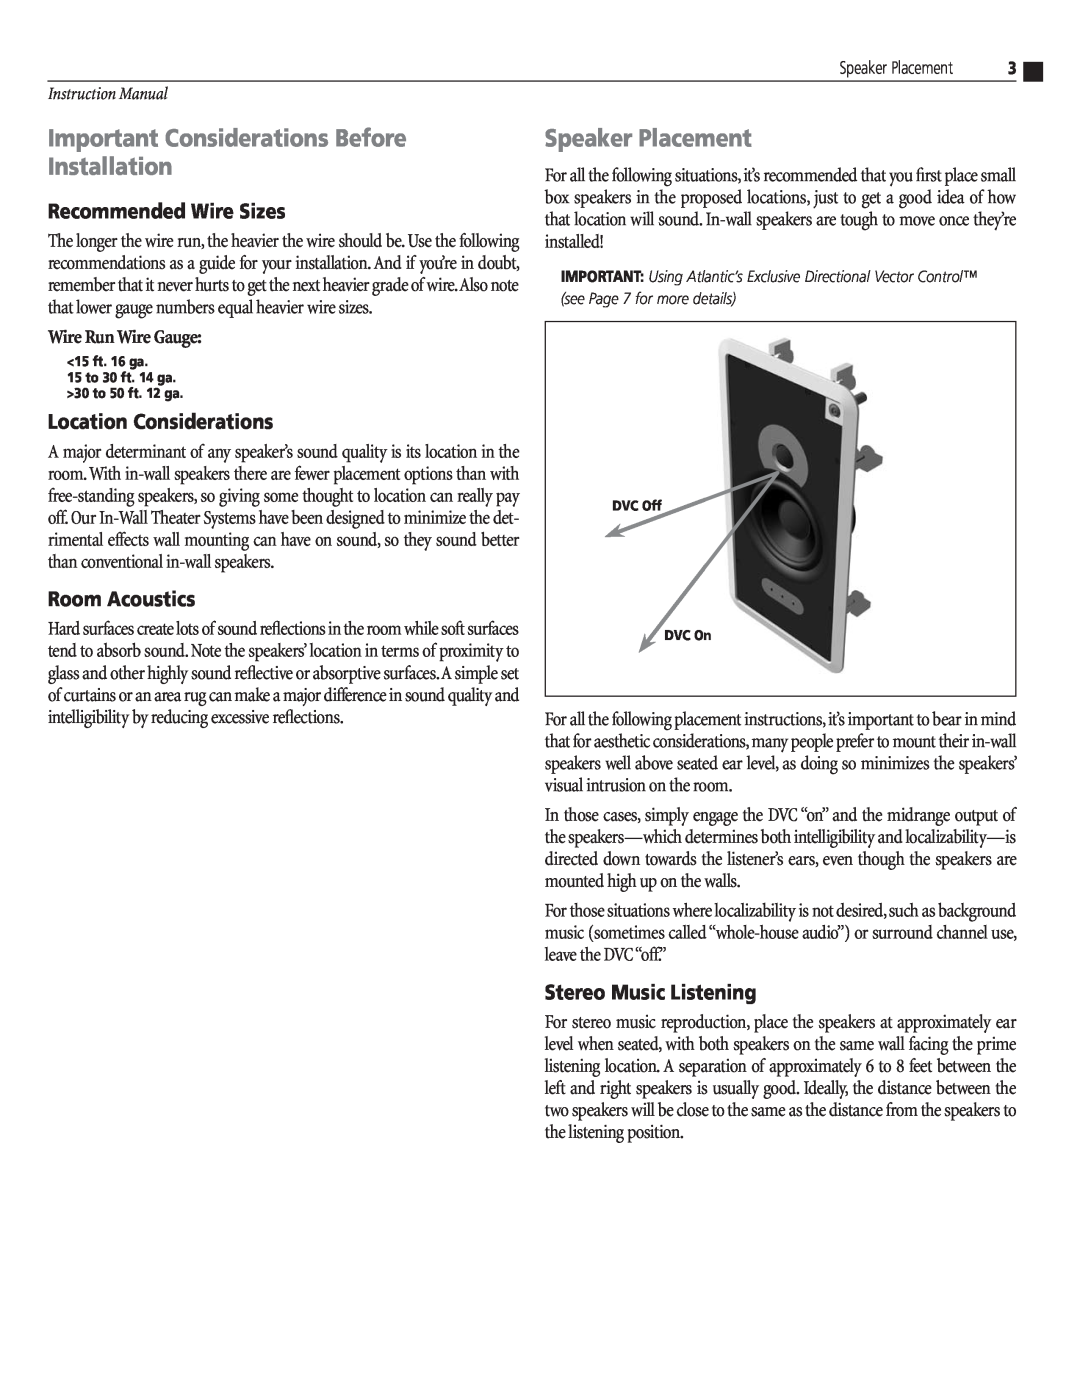 Atlantic Technology IWTS-14 LCR Important Considerations Before Installation, Speaker Placement, Recommended Wire Sizes 